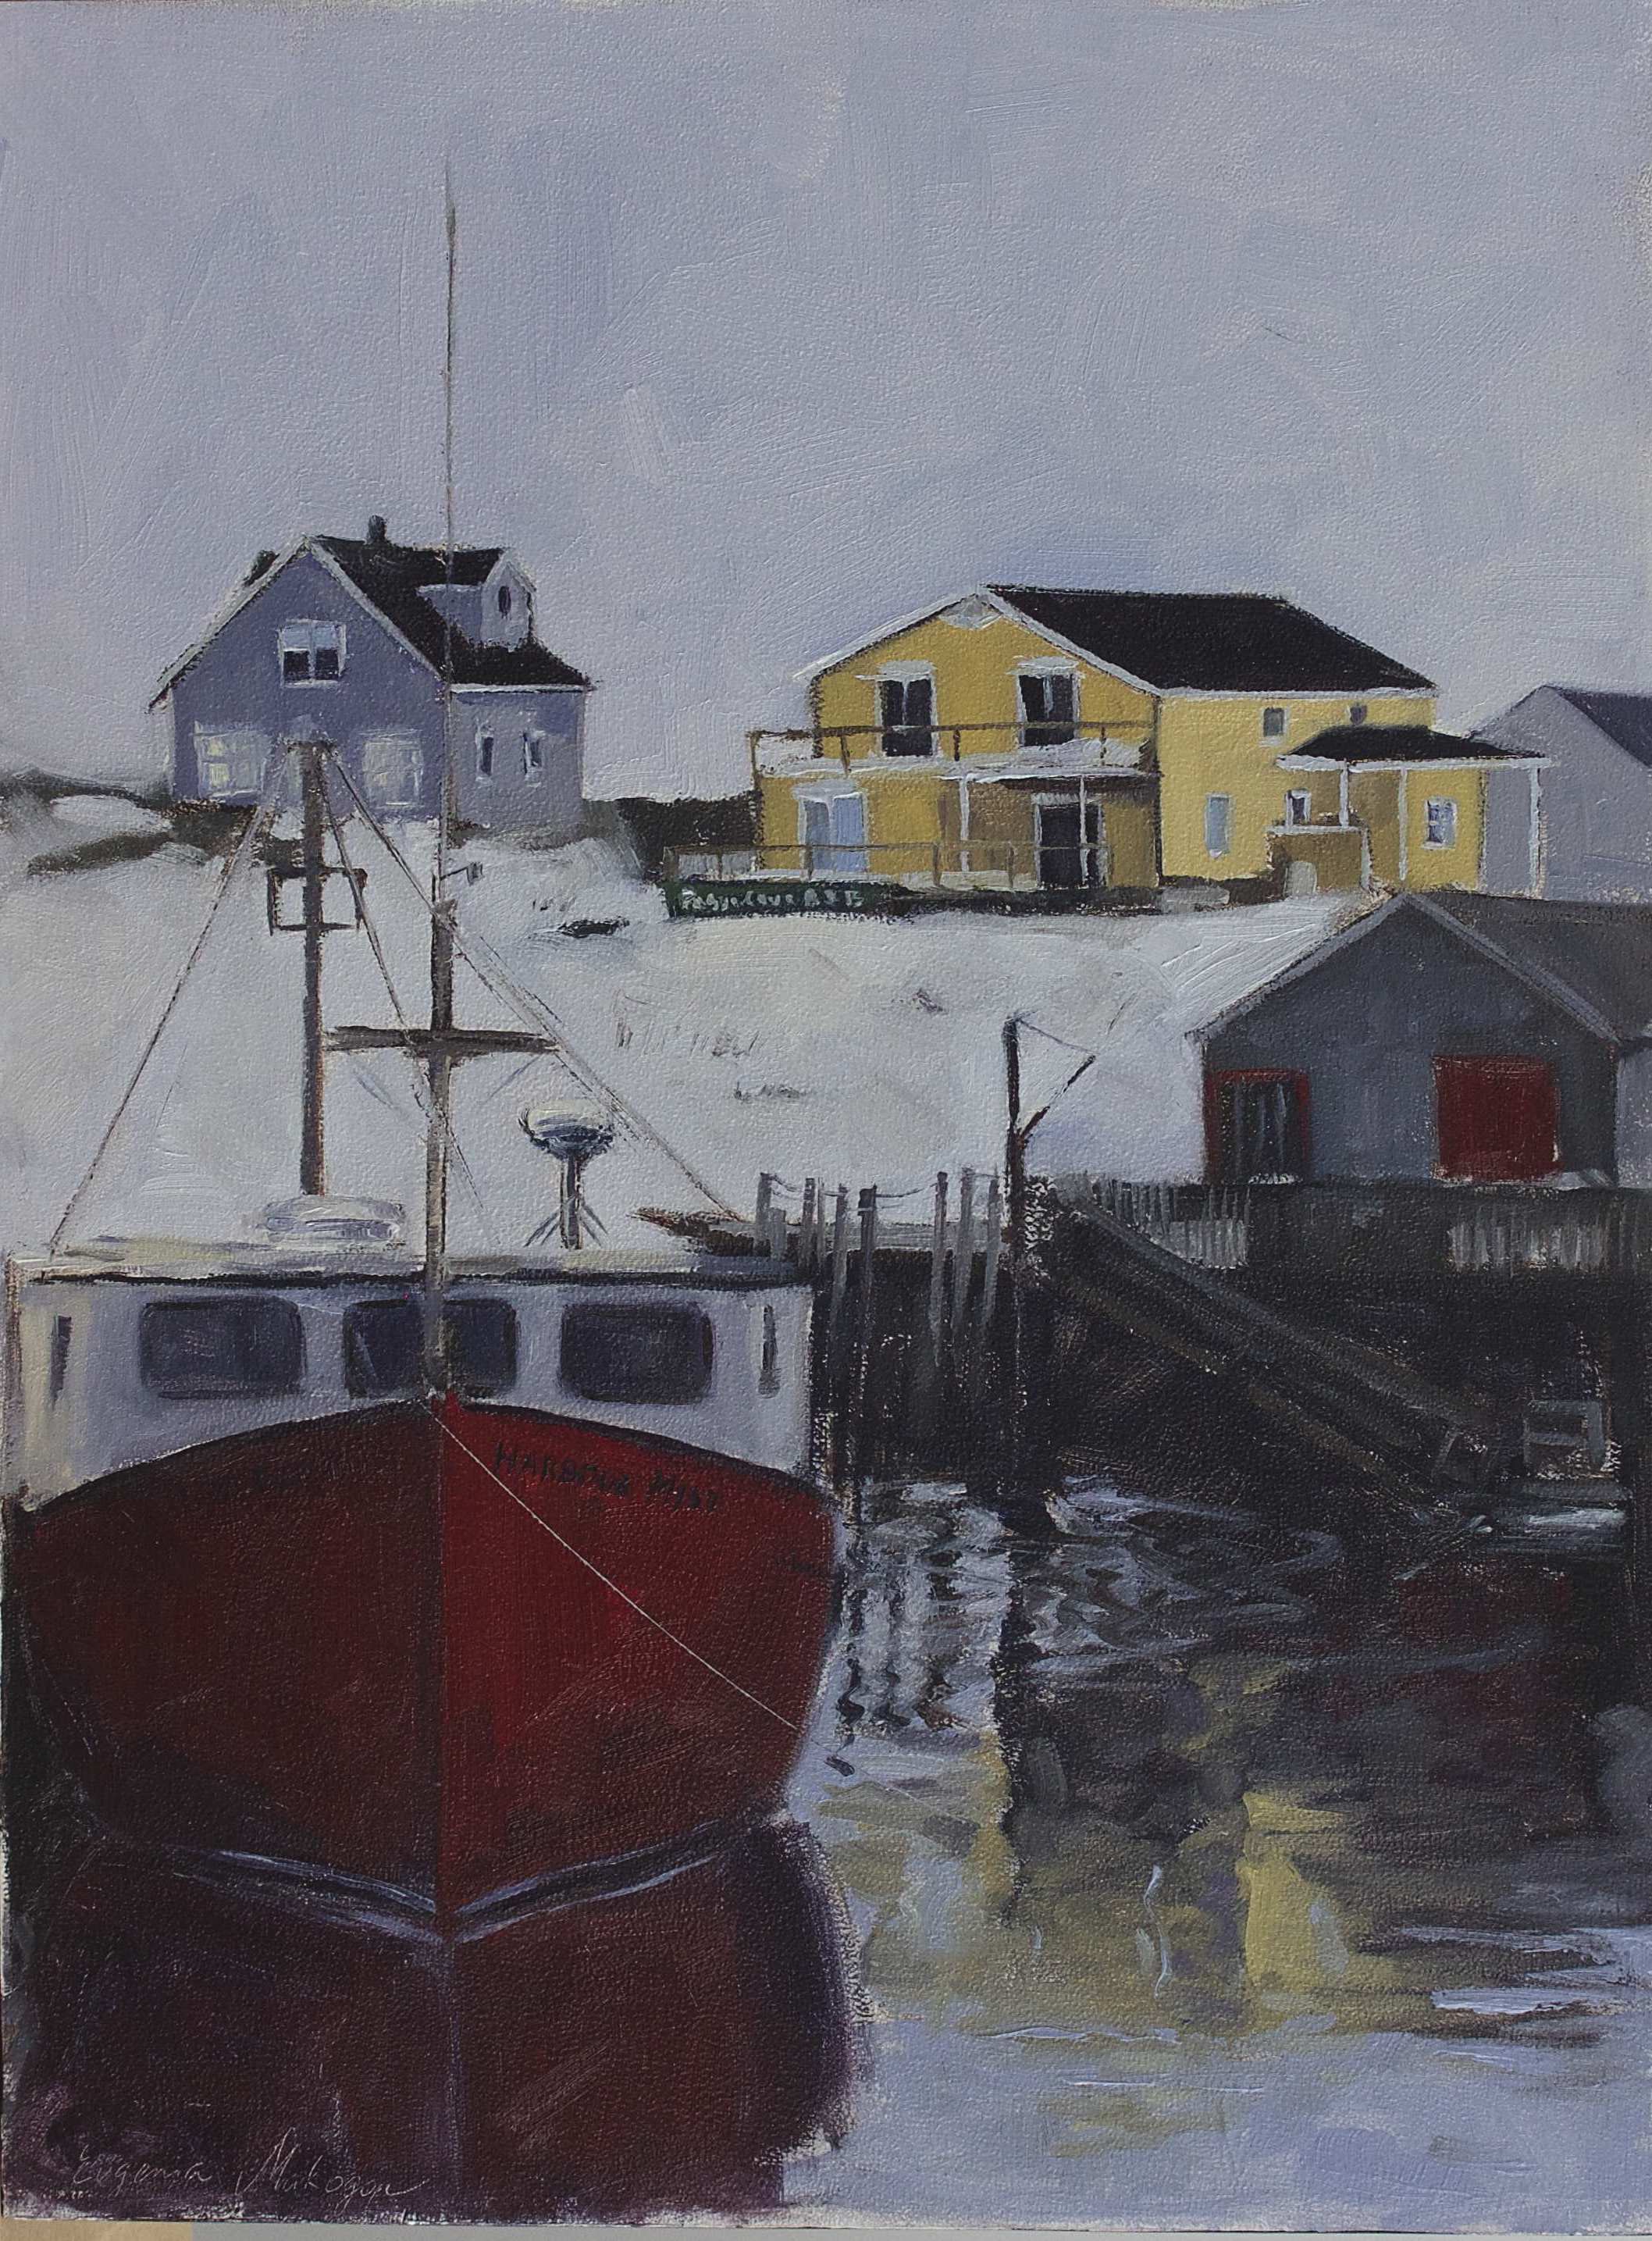 red boat in Peggy's cove harbour in a winter